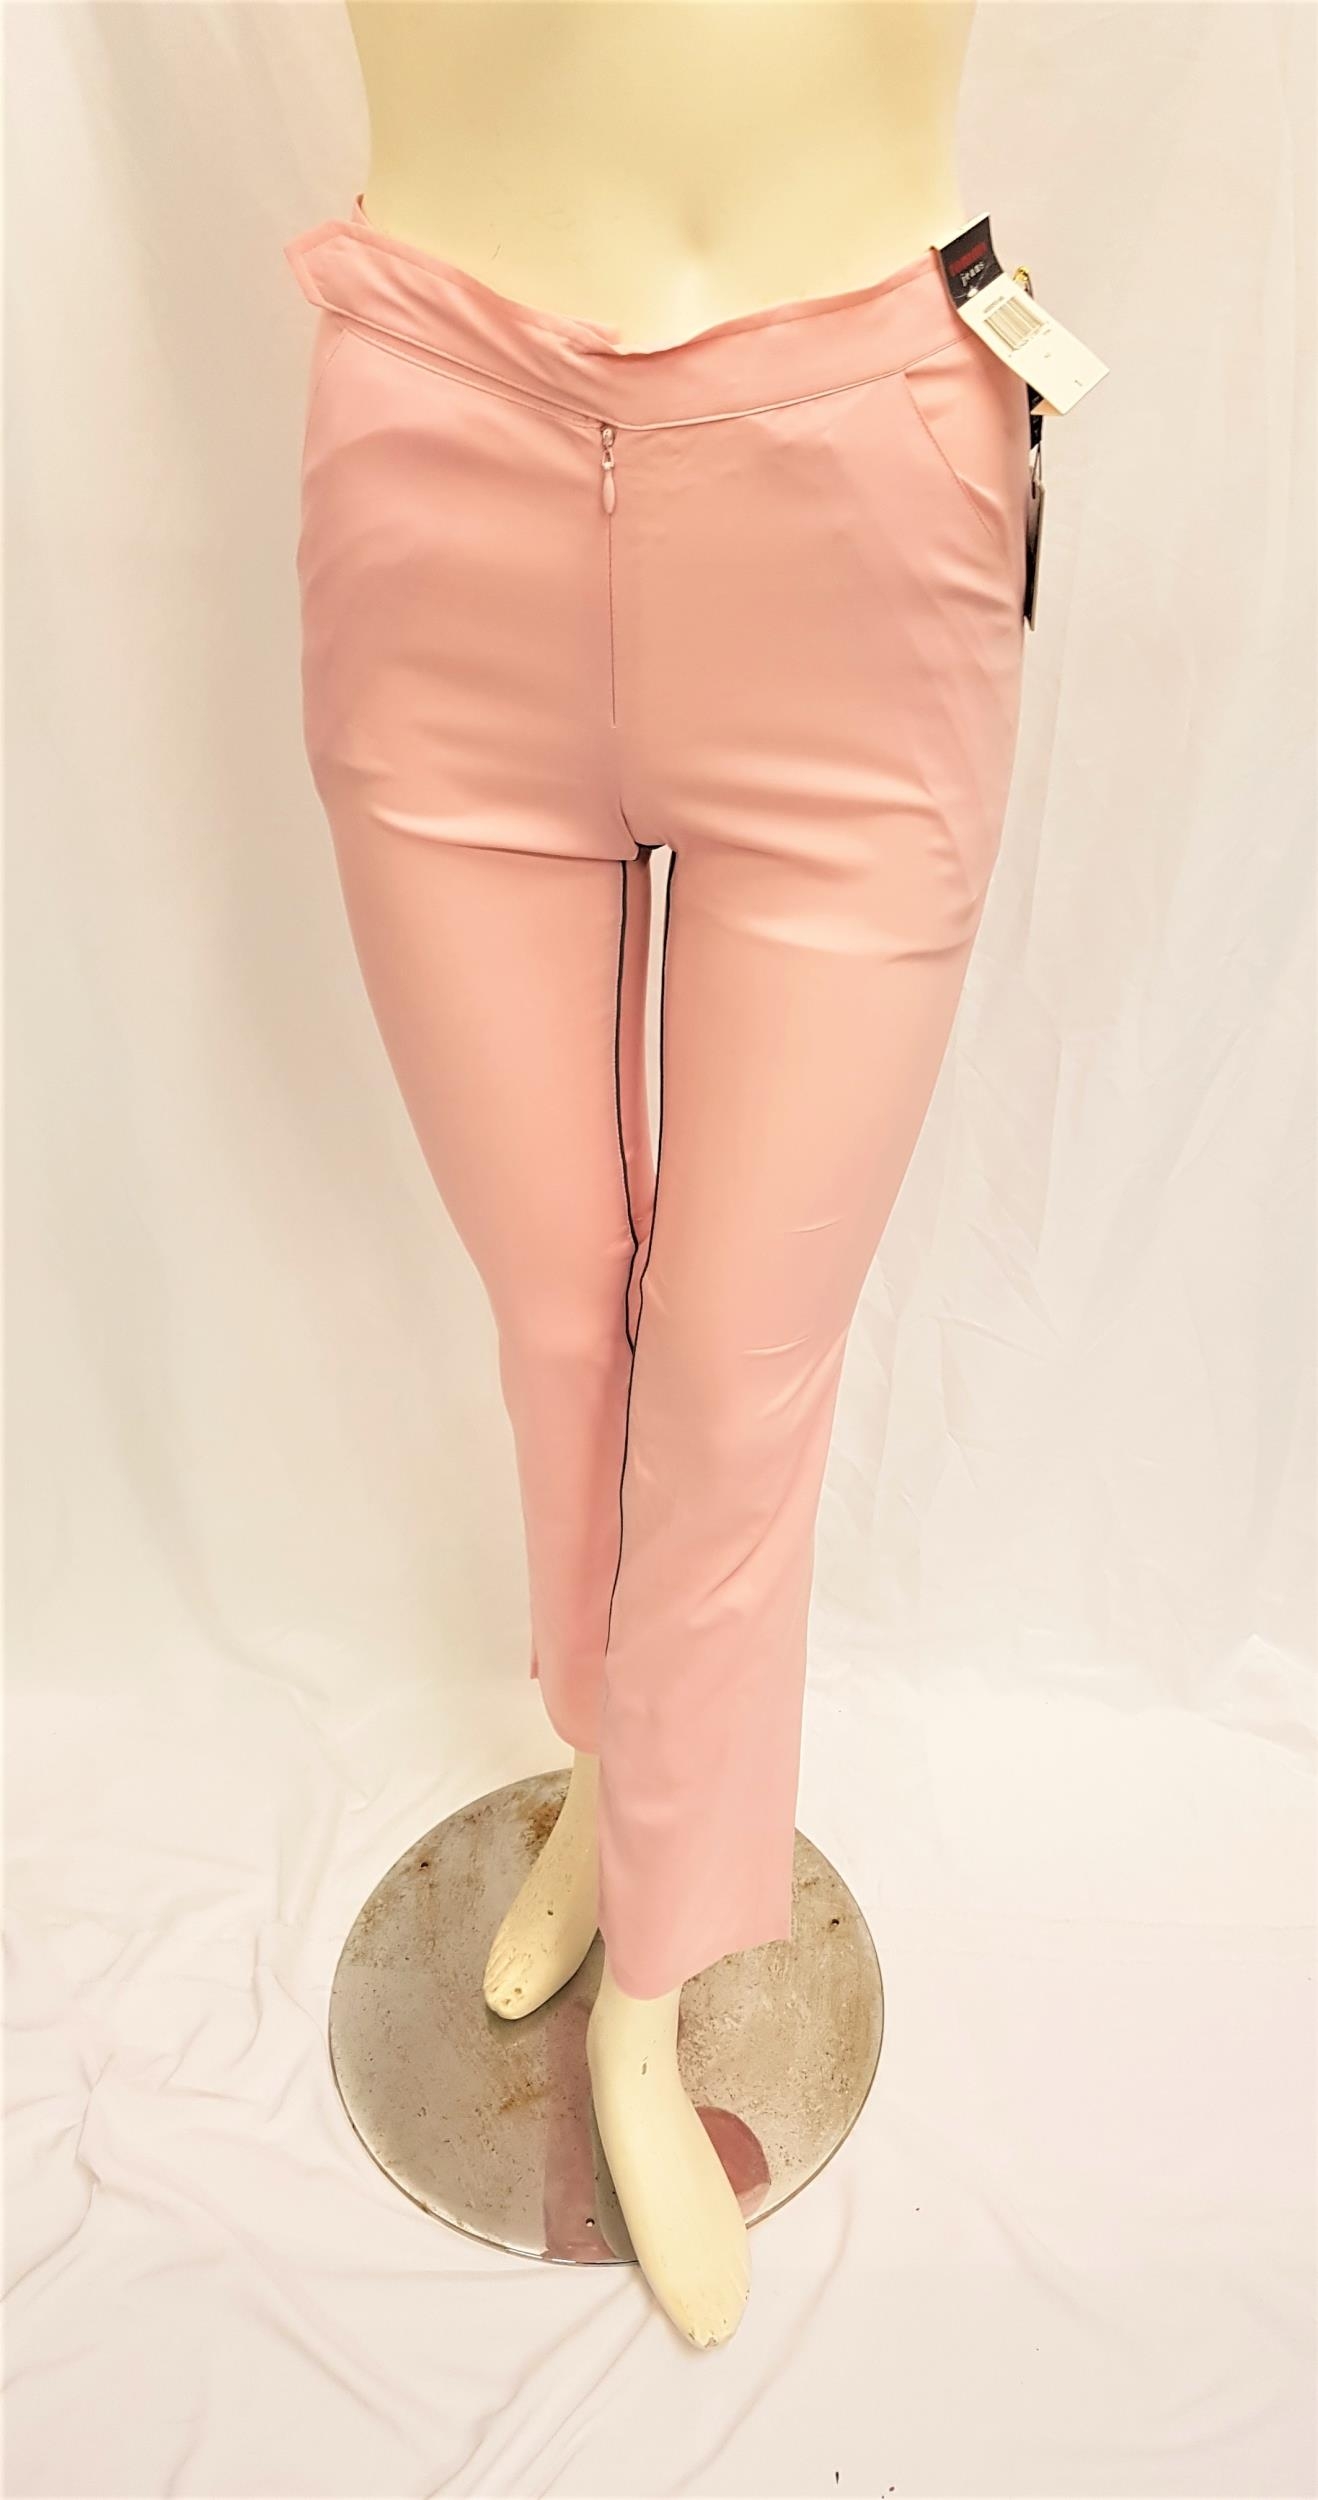 CARMEN ELECTRA - 'TOMMY JEANS' PINK STRETCH MATERIAL TROUSERS with tags, Size 1. Accompanied by Star